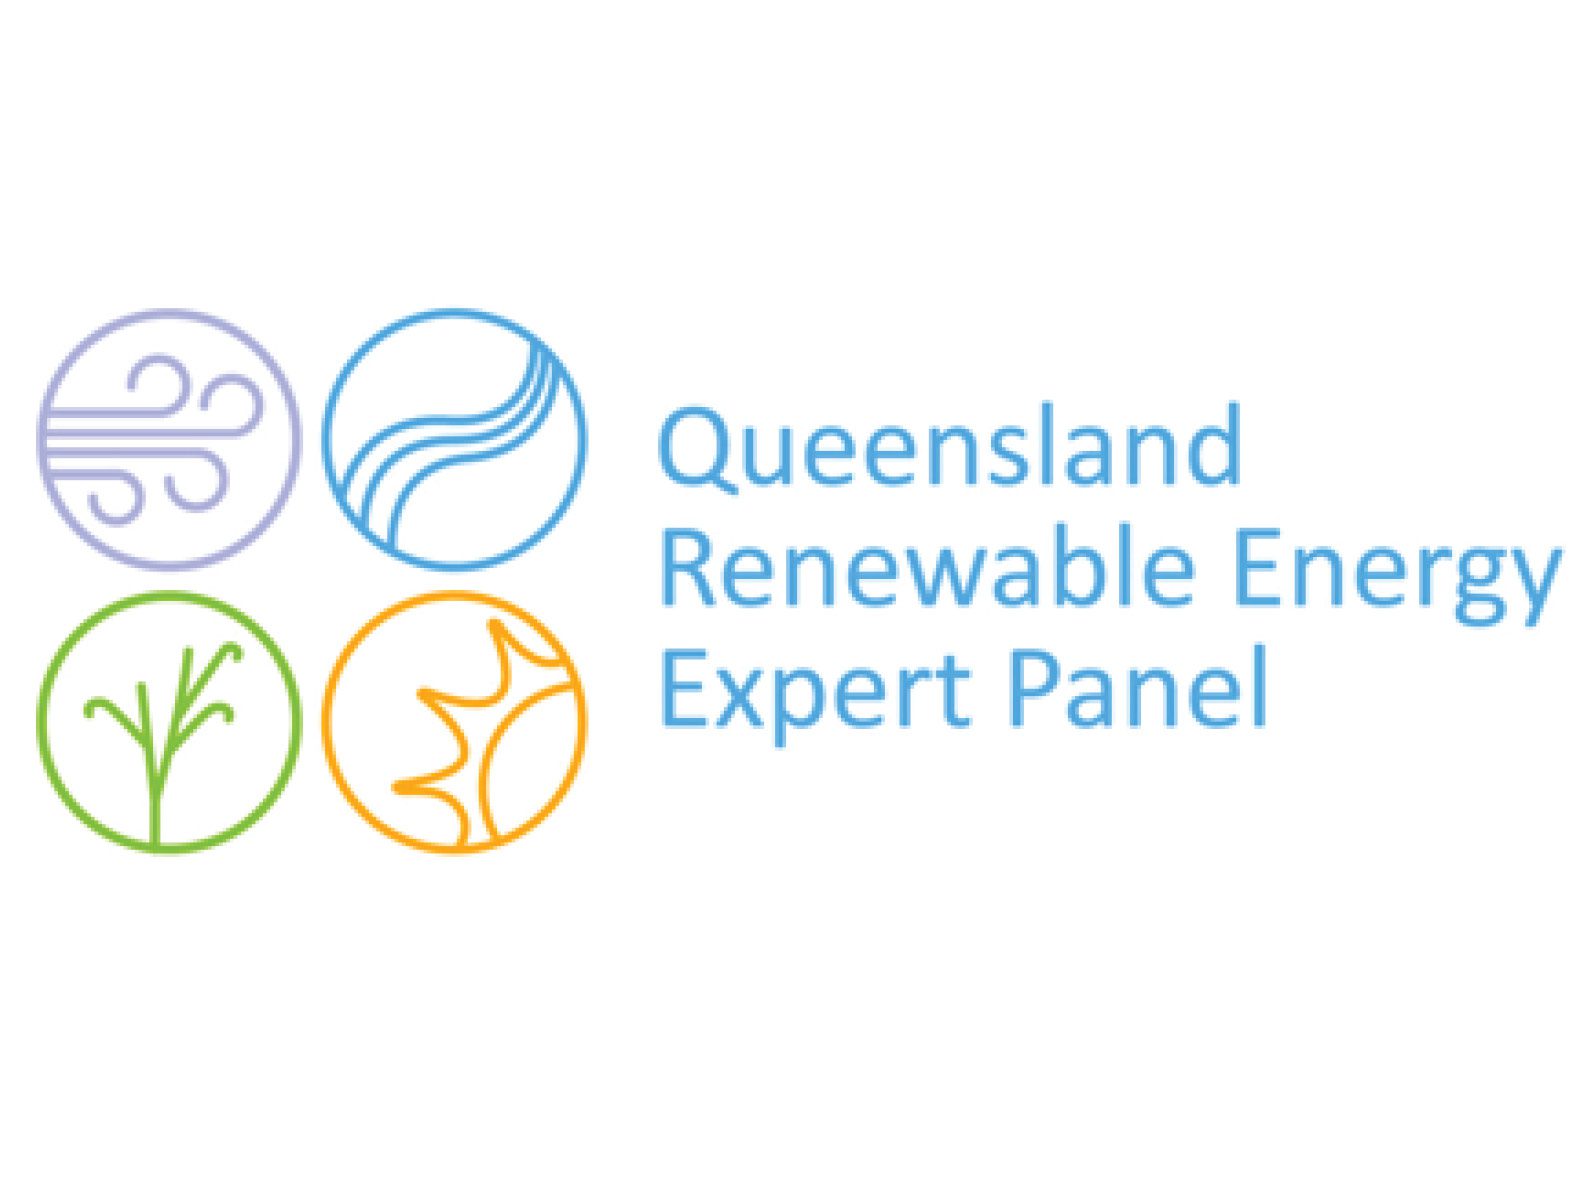 Queensland Renewable Energy Expert Panel logo which includes 4 circular graphics with a wind gust, water, plant and the sun depicted inside